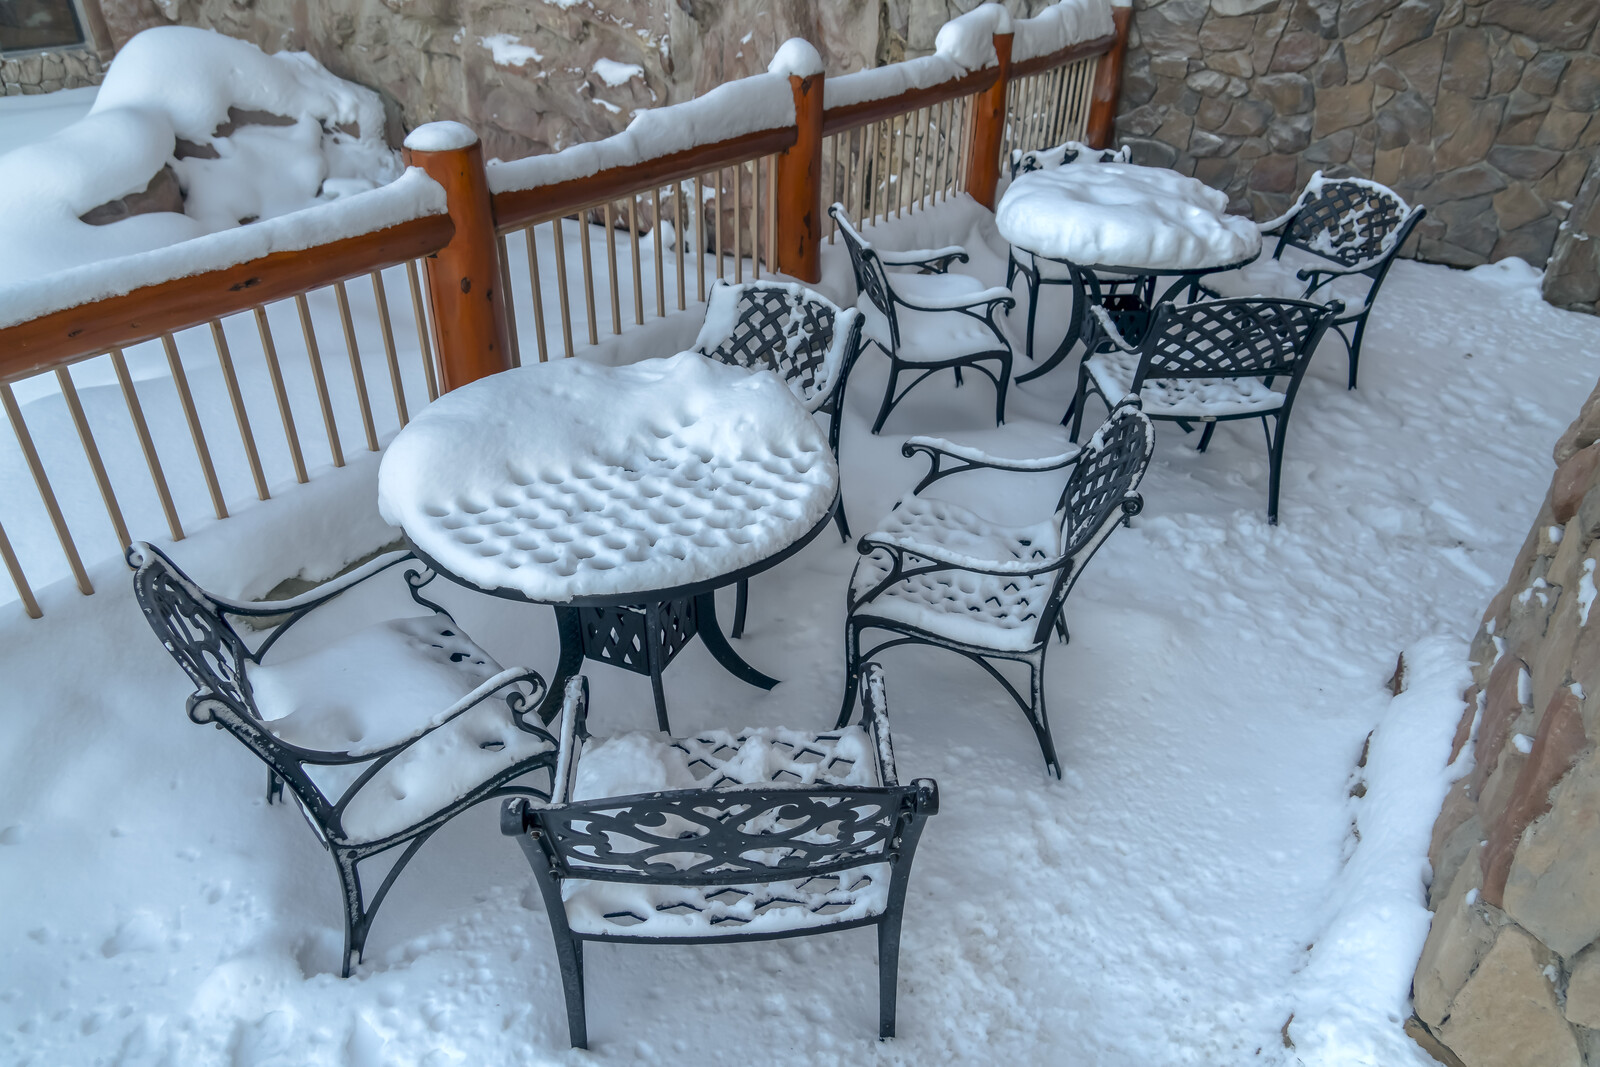 Snowy Outdoor Furniture